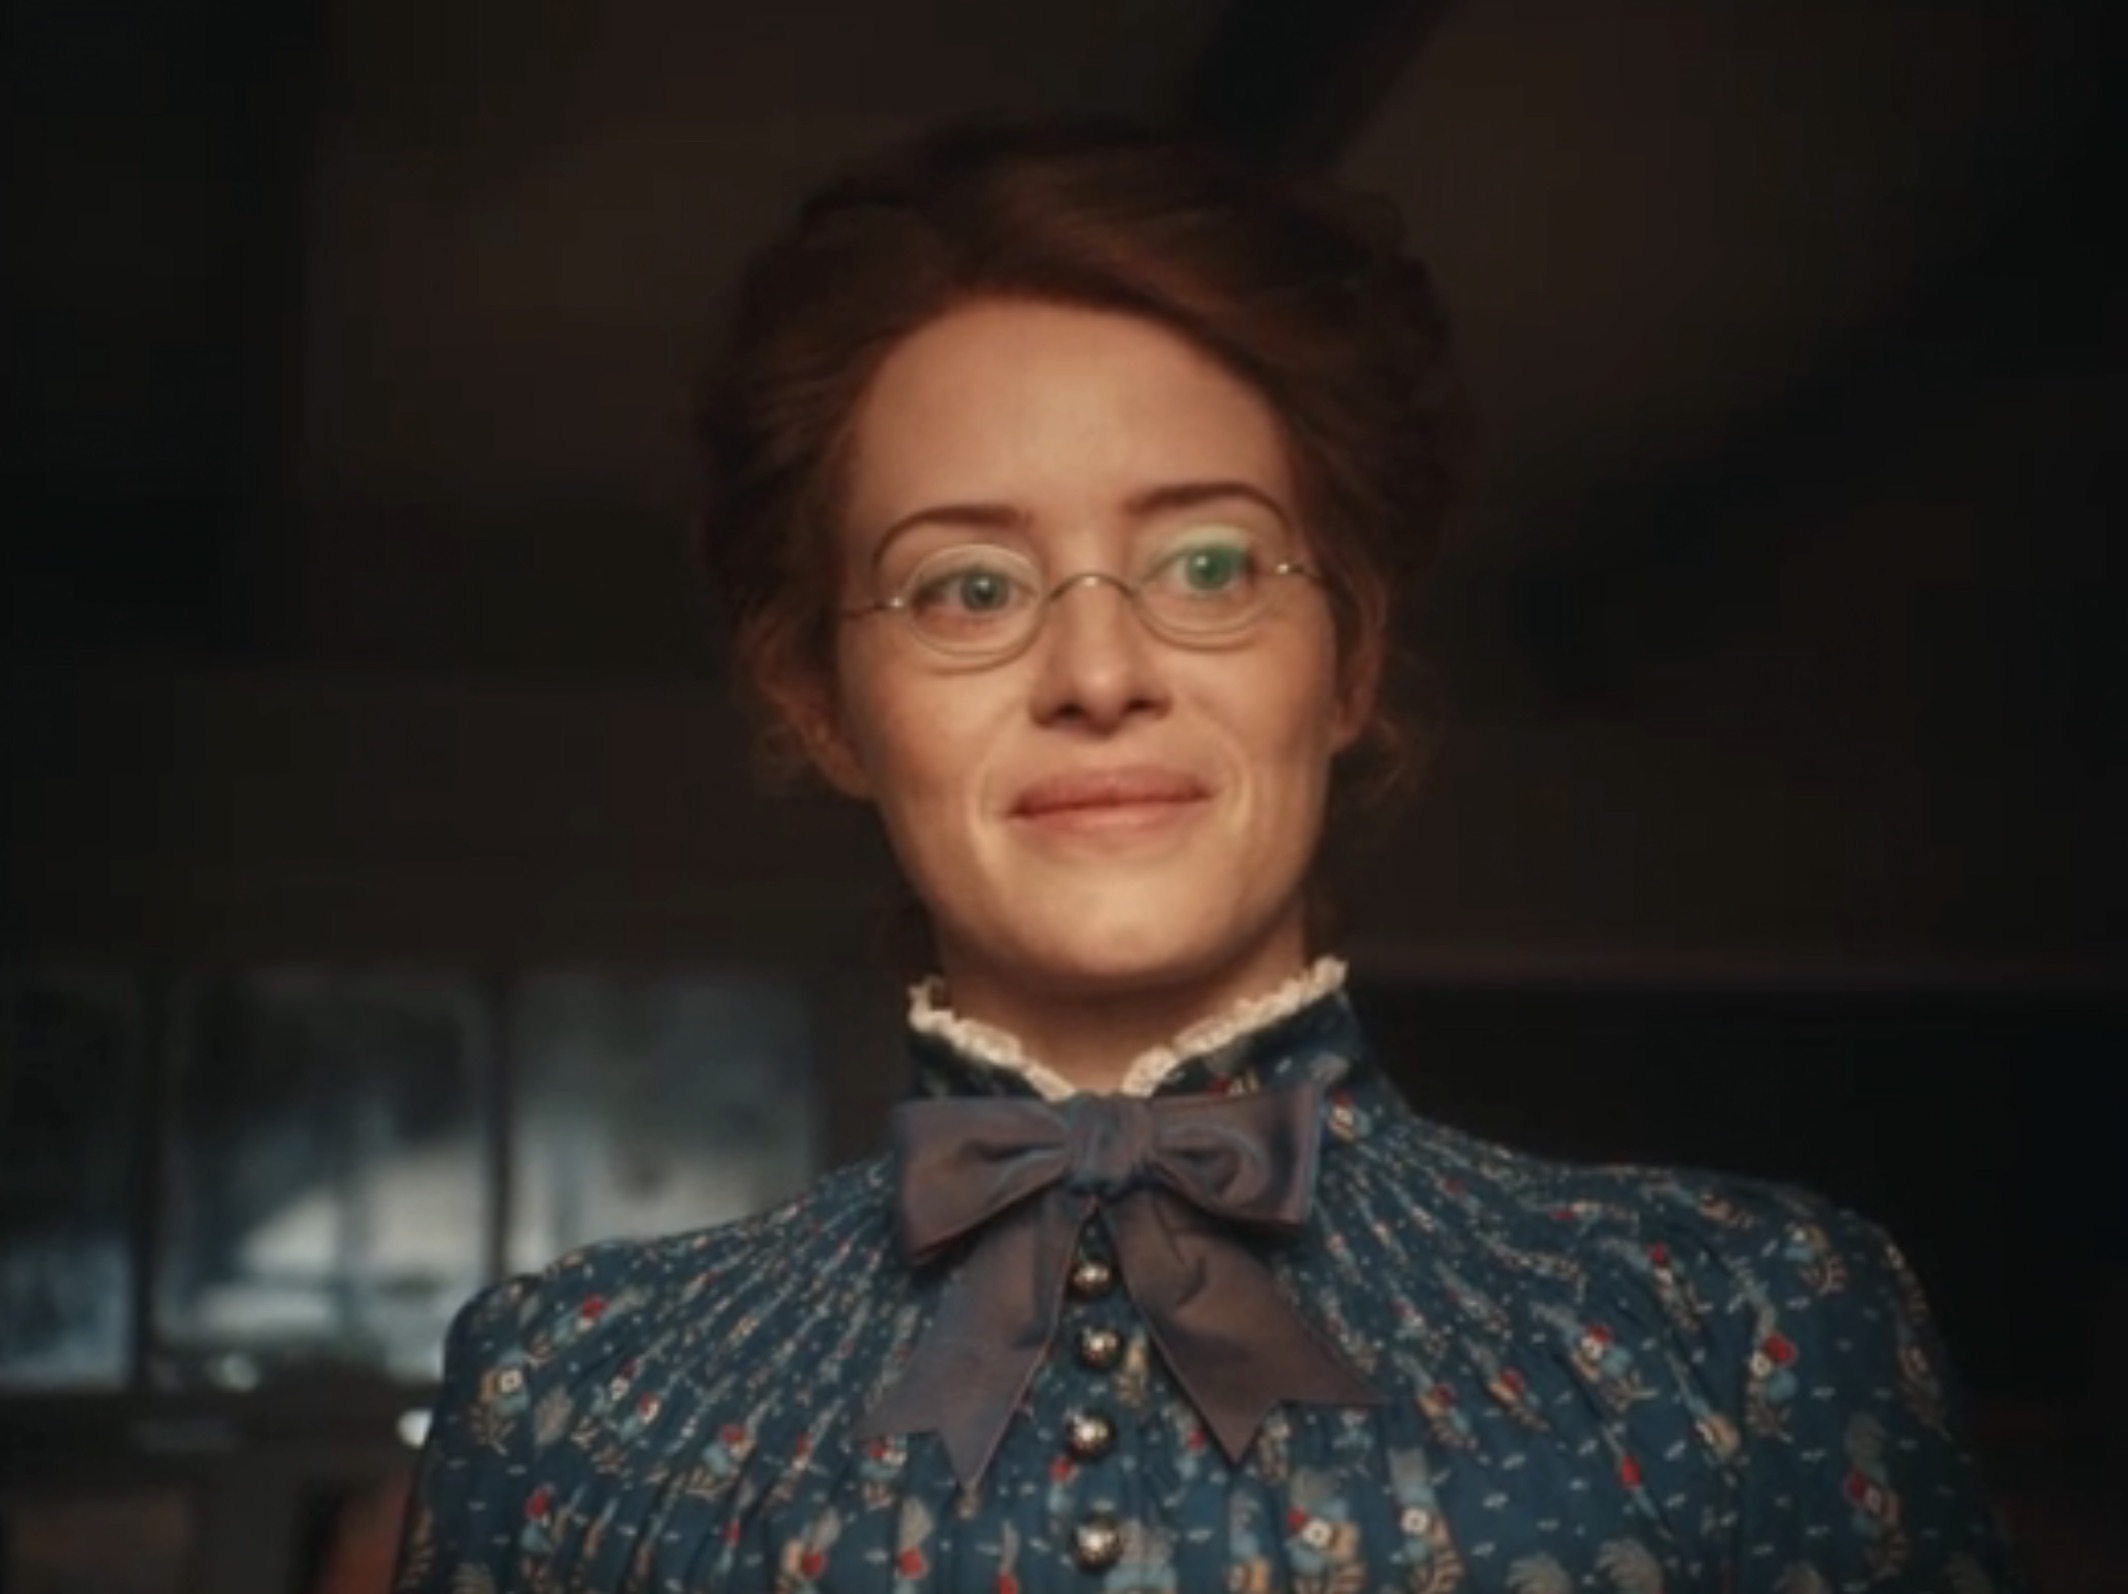 The Electrical Life of Louis Wain Cast - Claire Foy as Emily Richardson-Wain